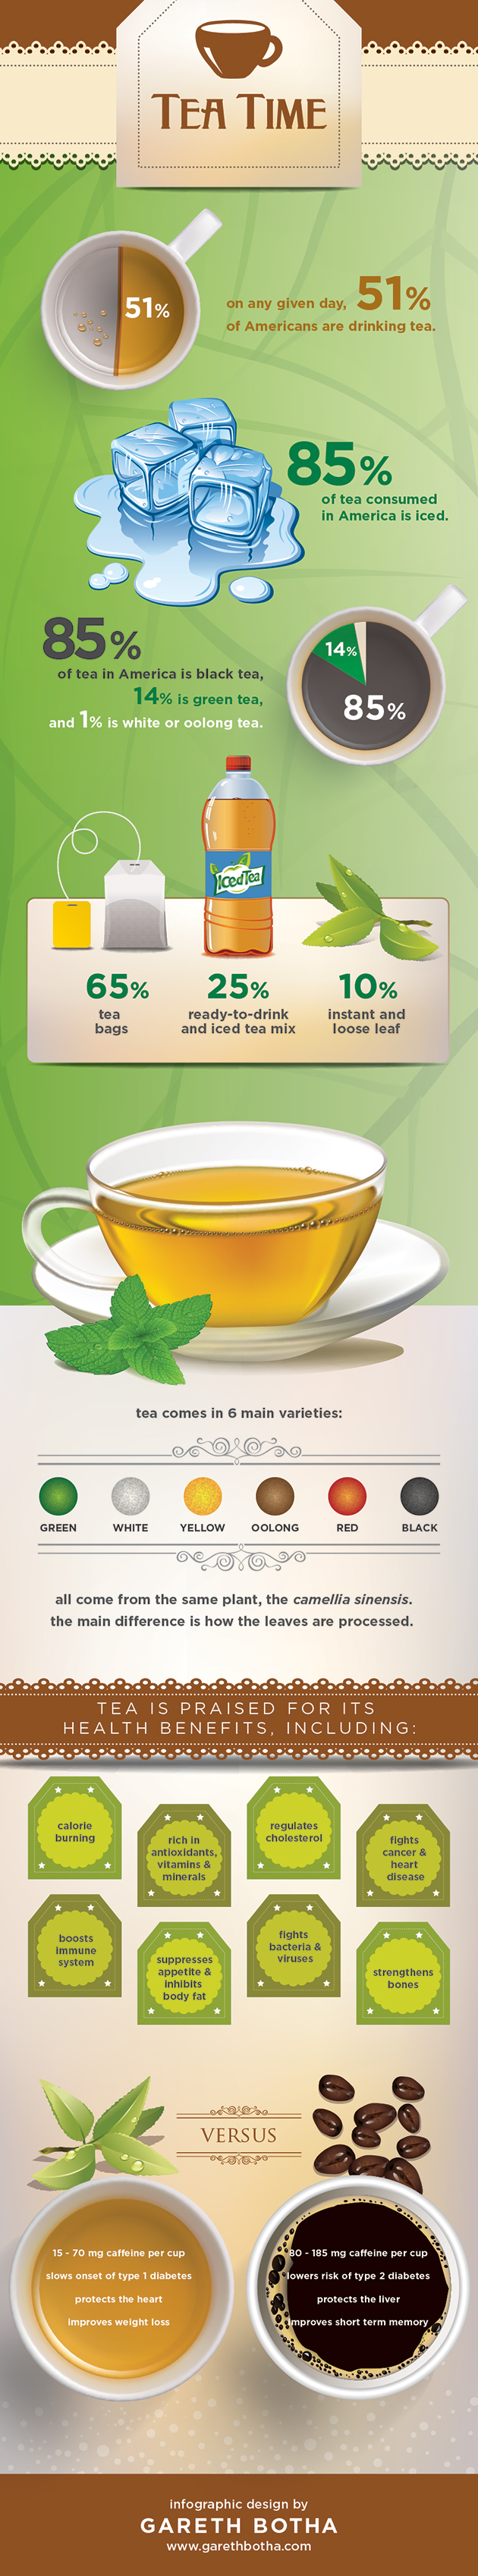 Interesting Facts About Tea